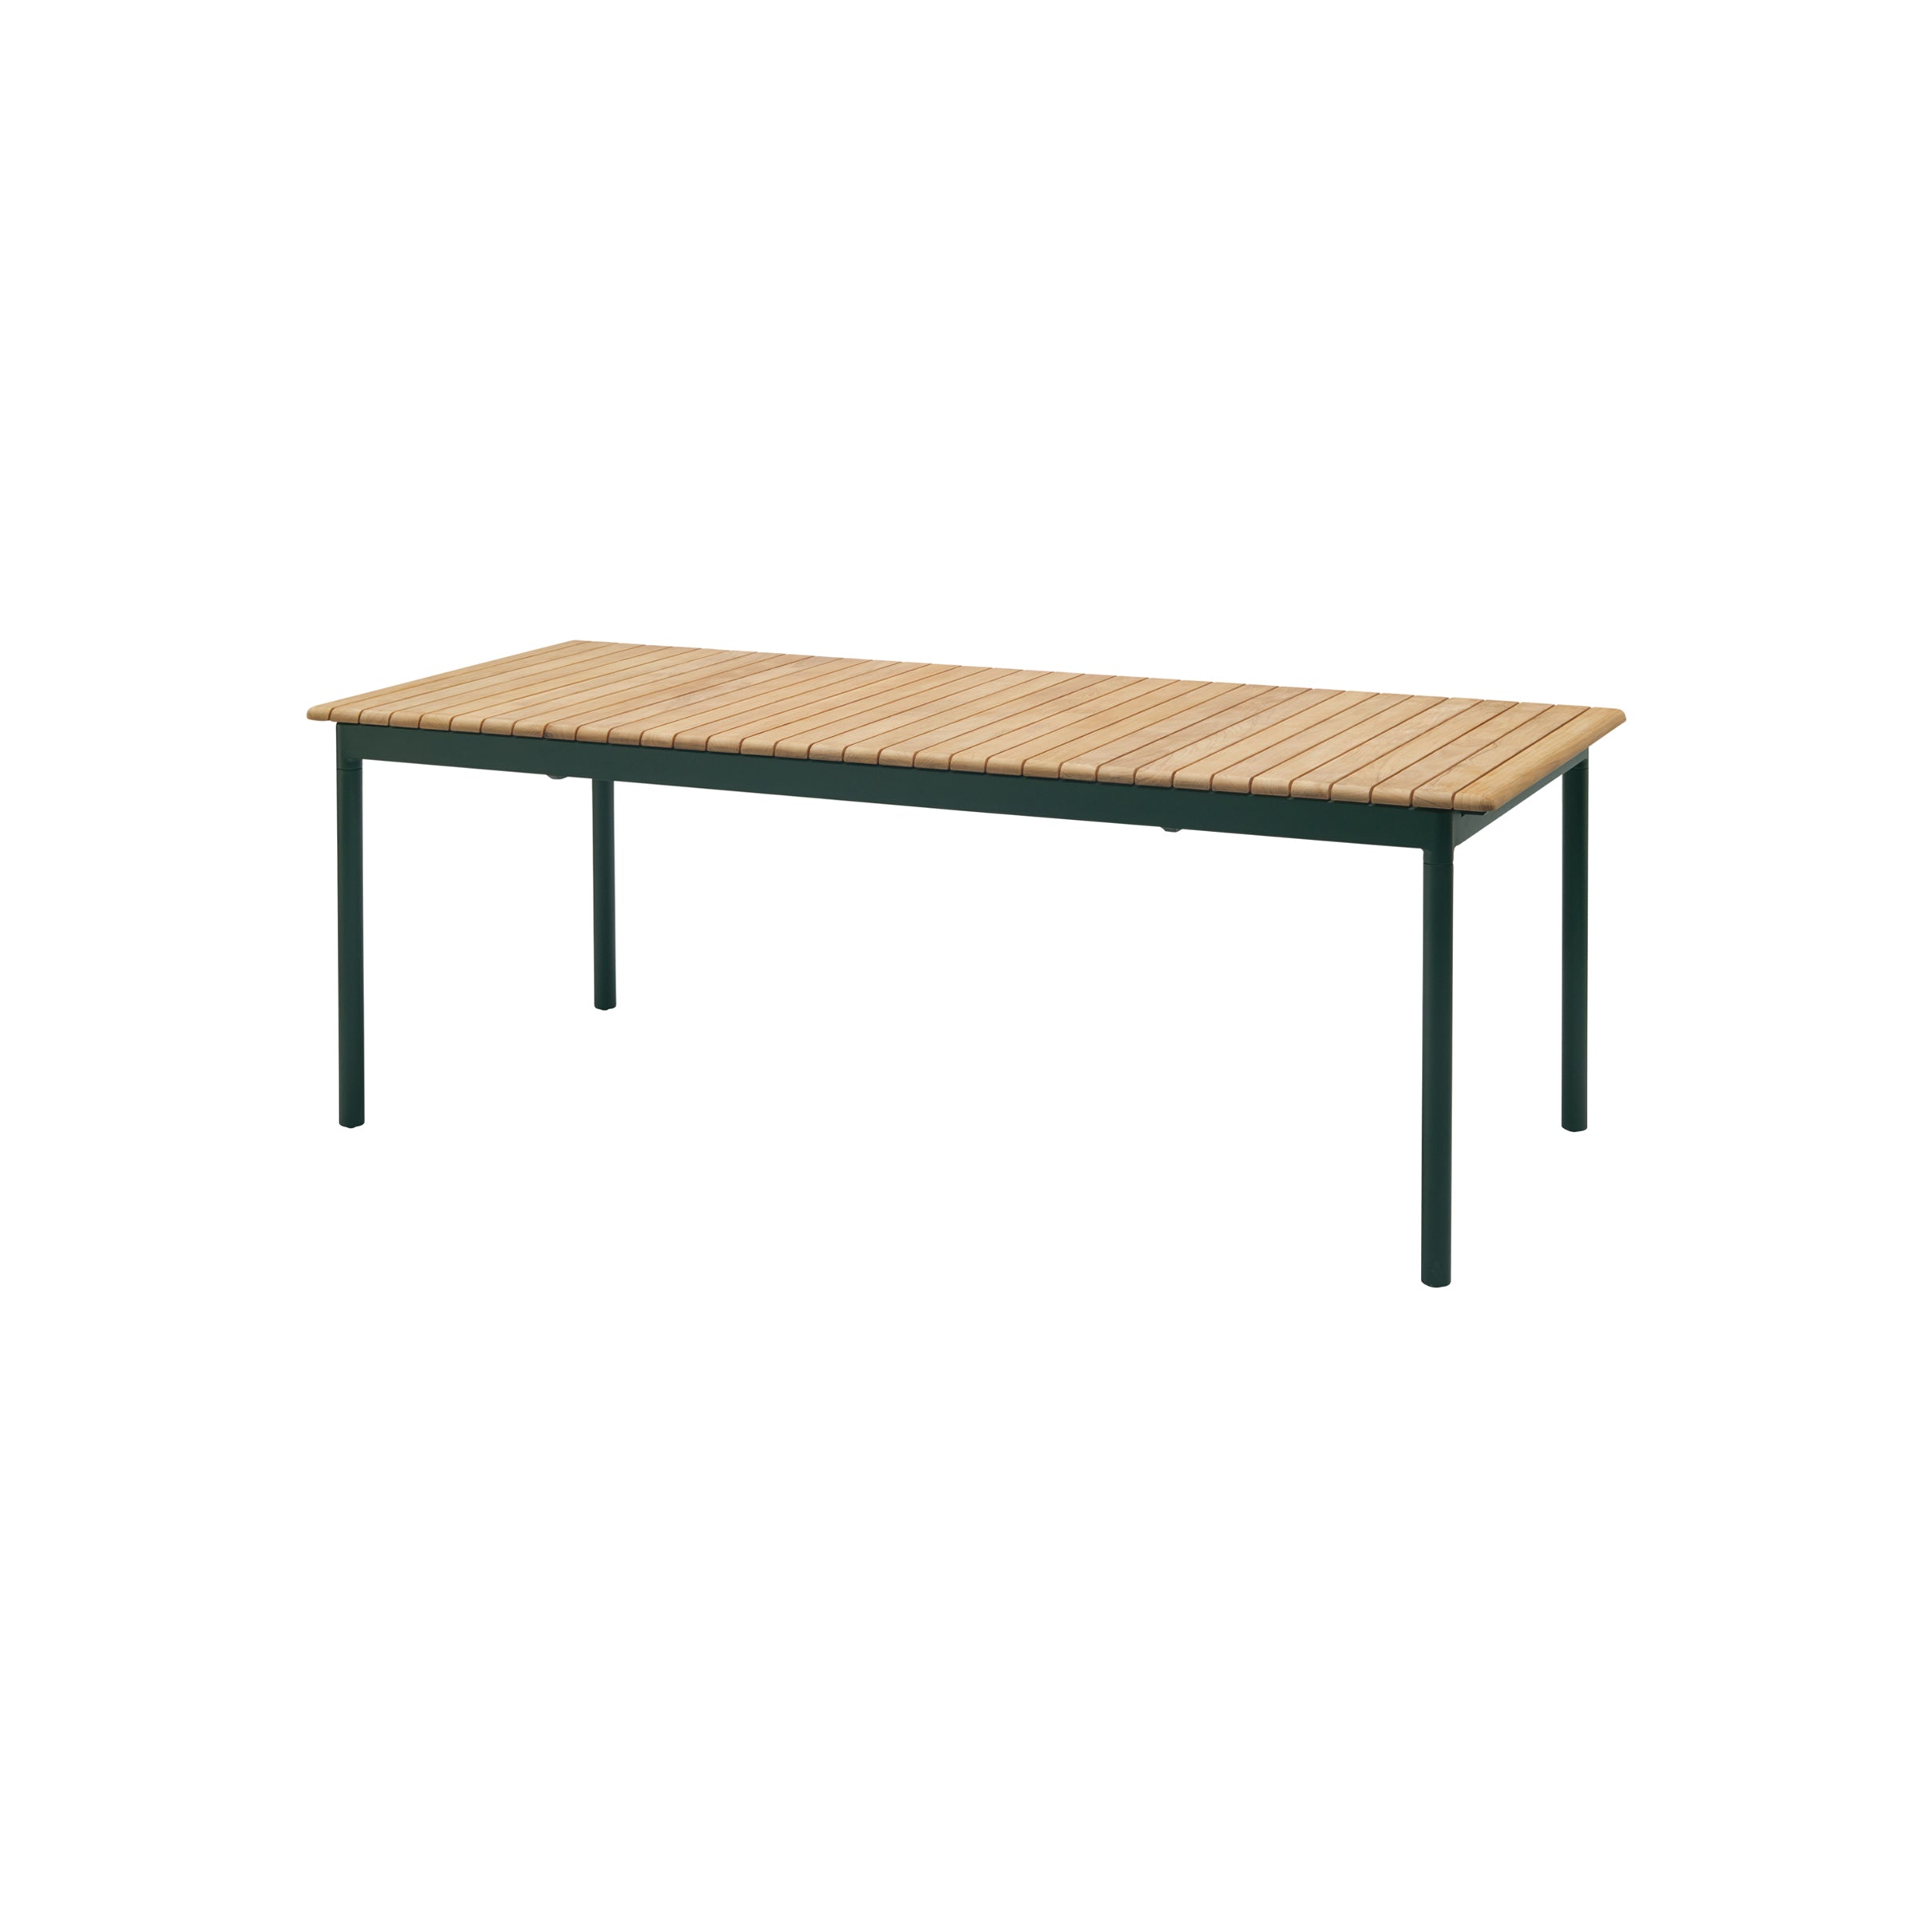 Pelagus Table: Hunter Green + Without Extension Plate